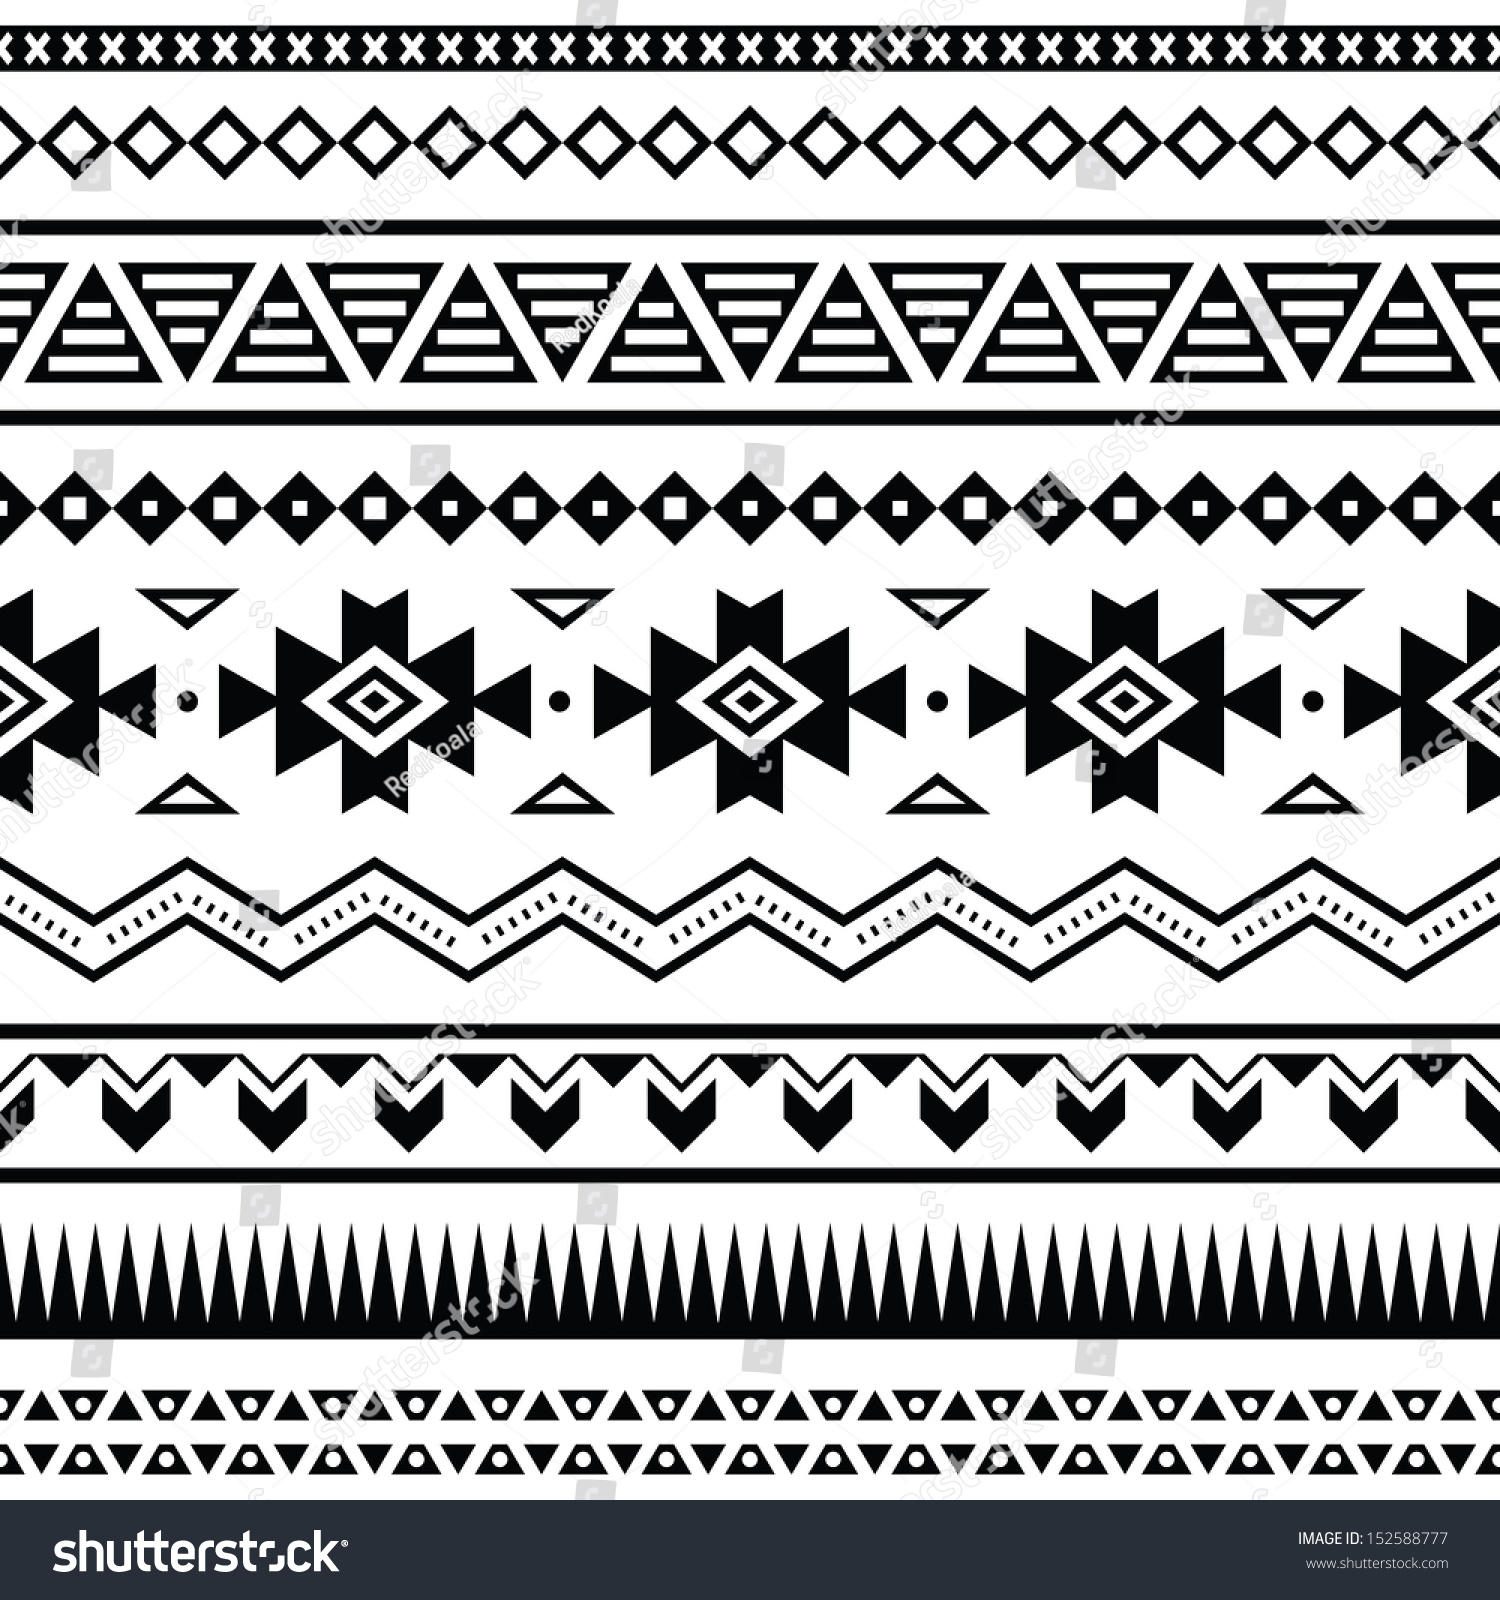 Aztec Mexican Seamless Pattern Stock Vector Illustration 152588777 ...